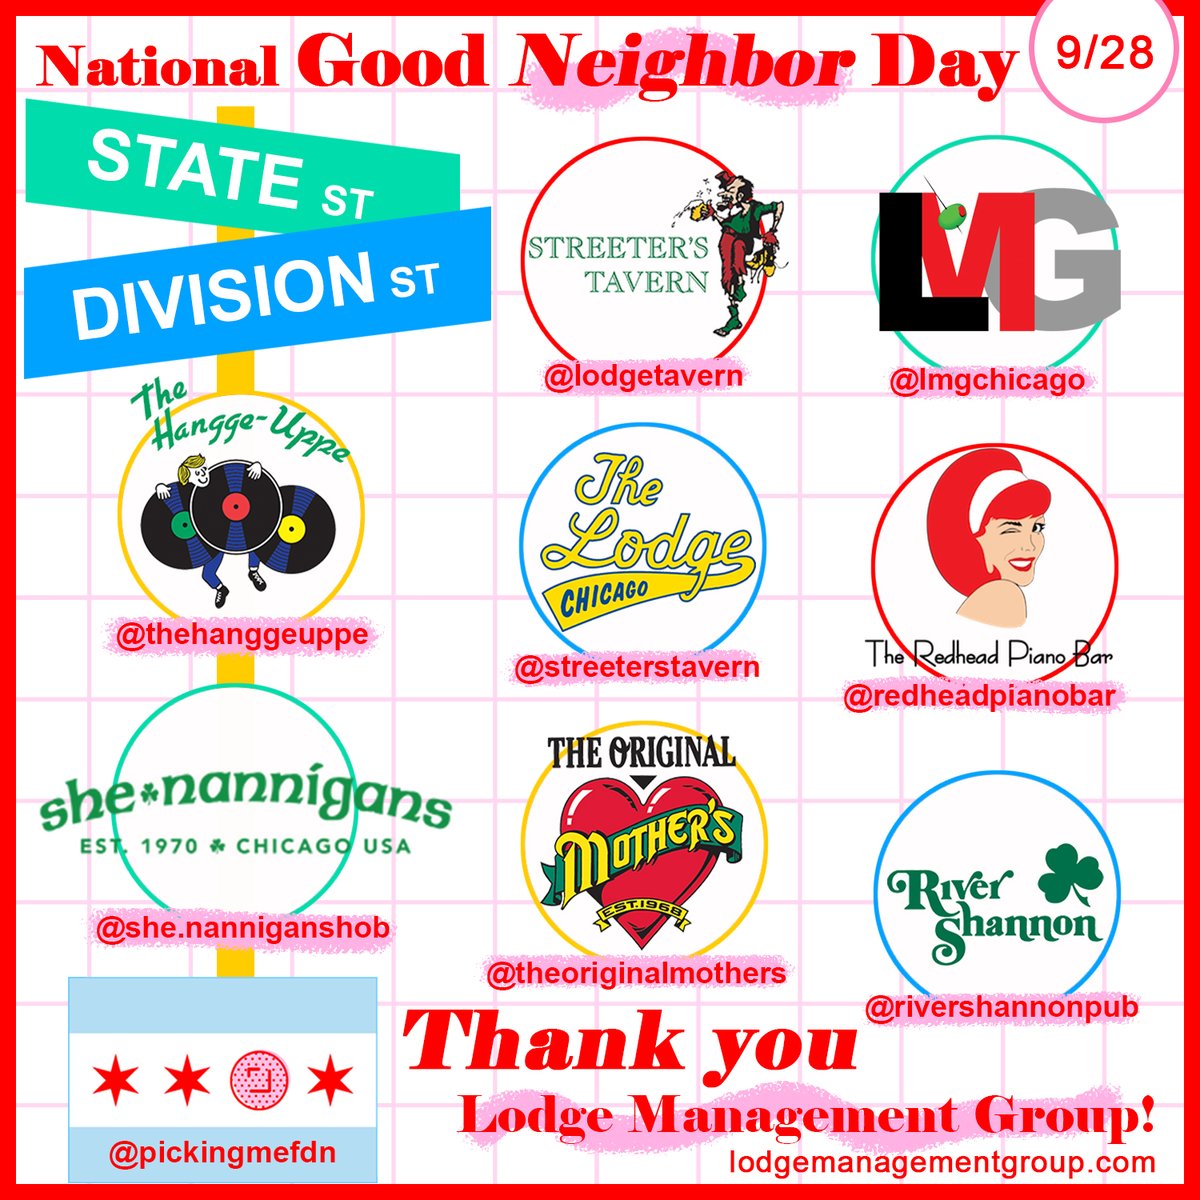 It's #NationalGoodNeighborDay & we're giving thanks to our neighbors @LmgChicago for their expertise in entertainment & love for mixing hospitality & philanthropy. #GoodNeighborDay @LodgeTavern @TheHanggeUppe @StreetersTavern @RedheadPianoBar @ShenannigansHOB @RiverShannonPub